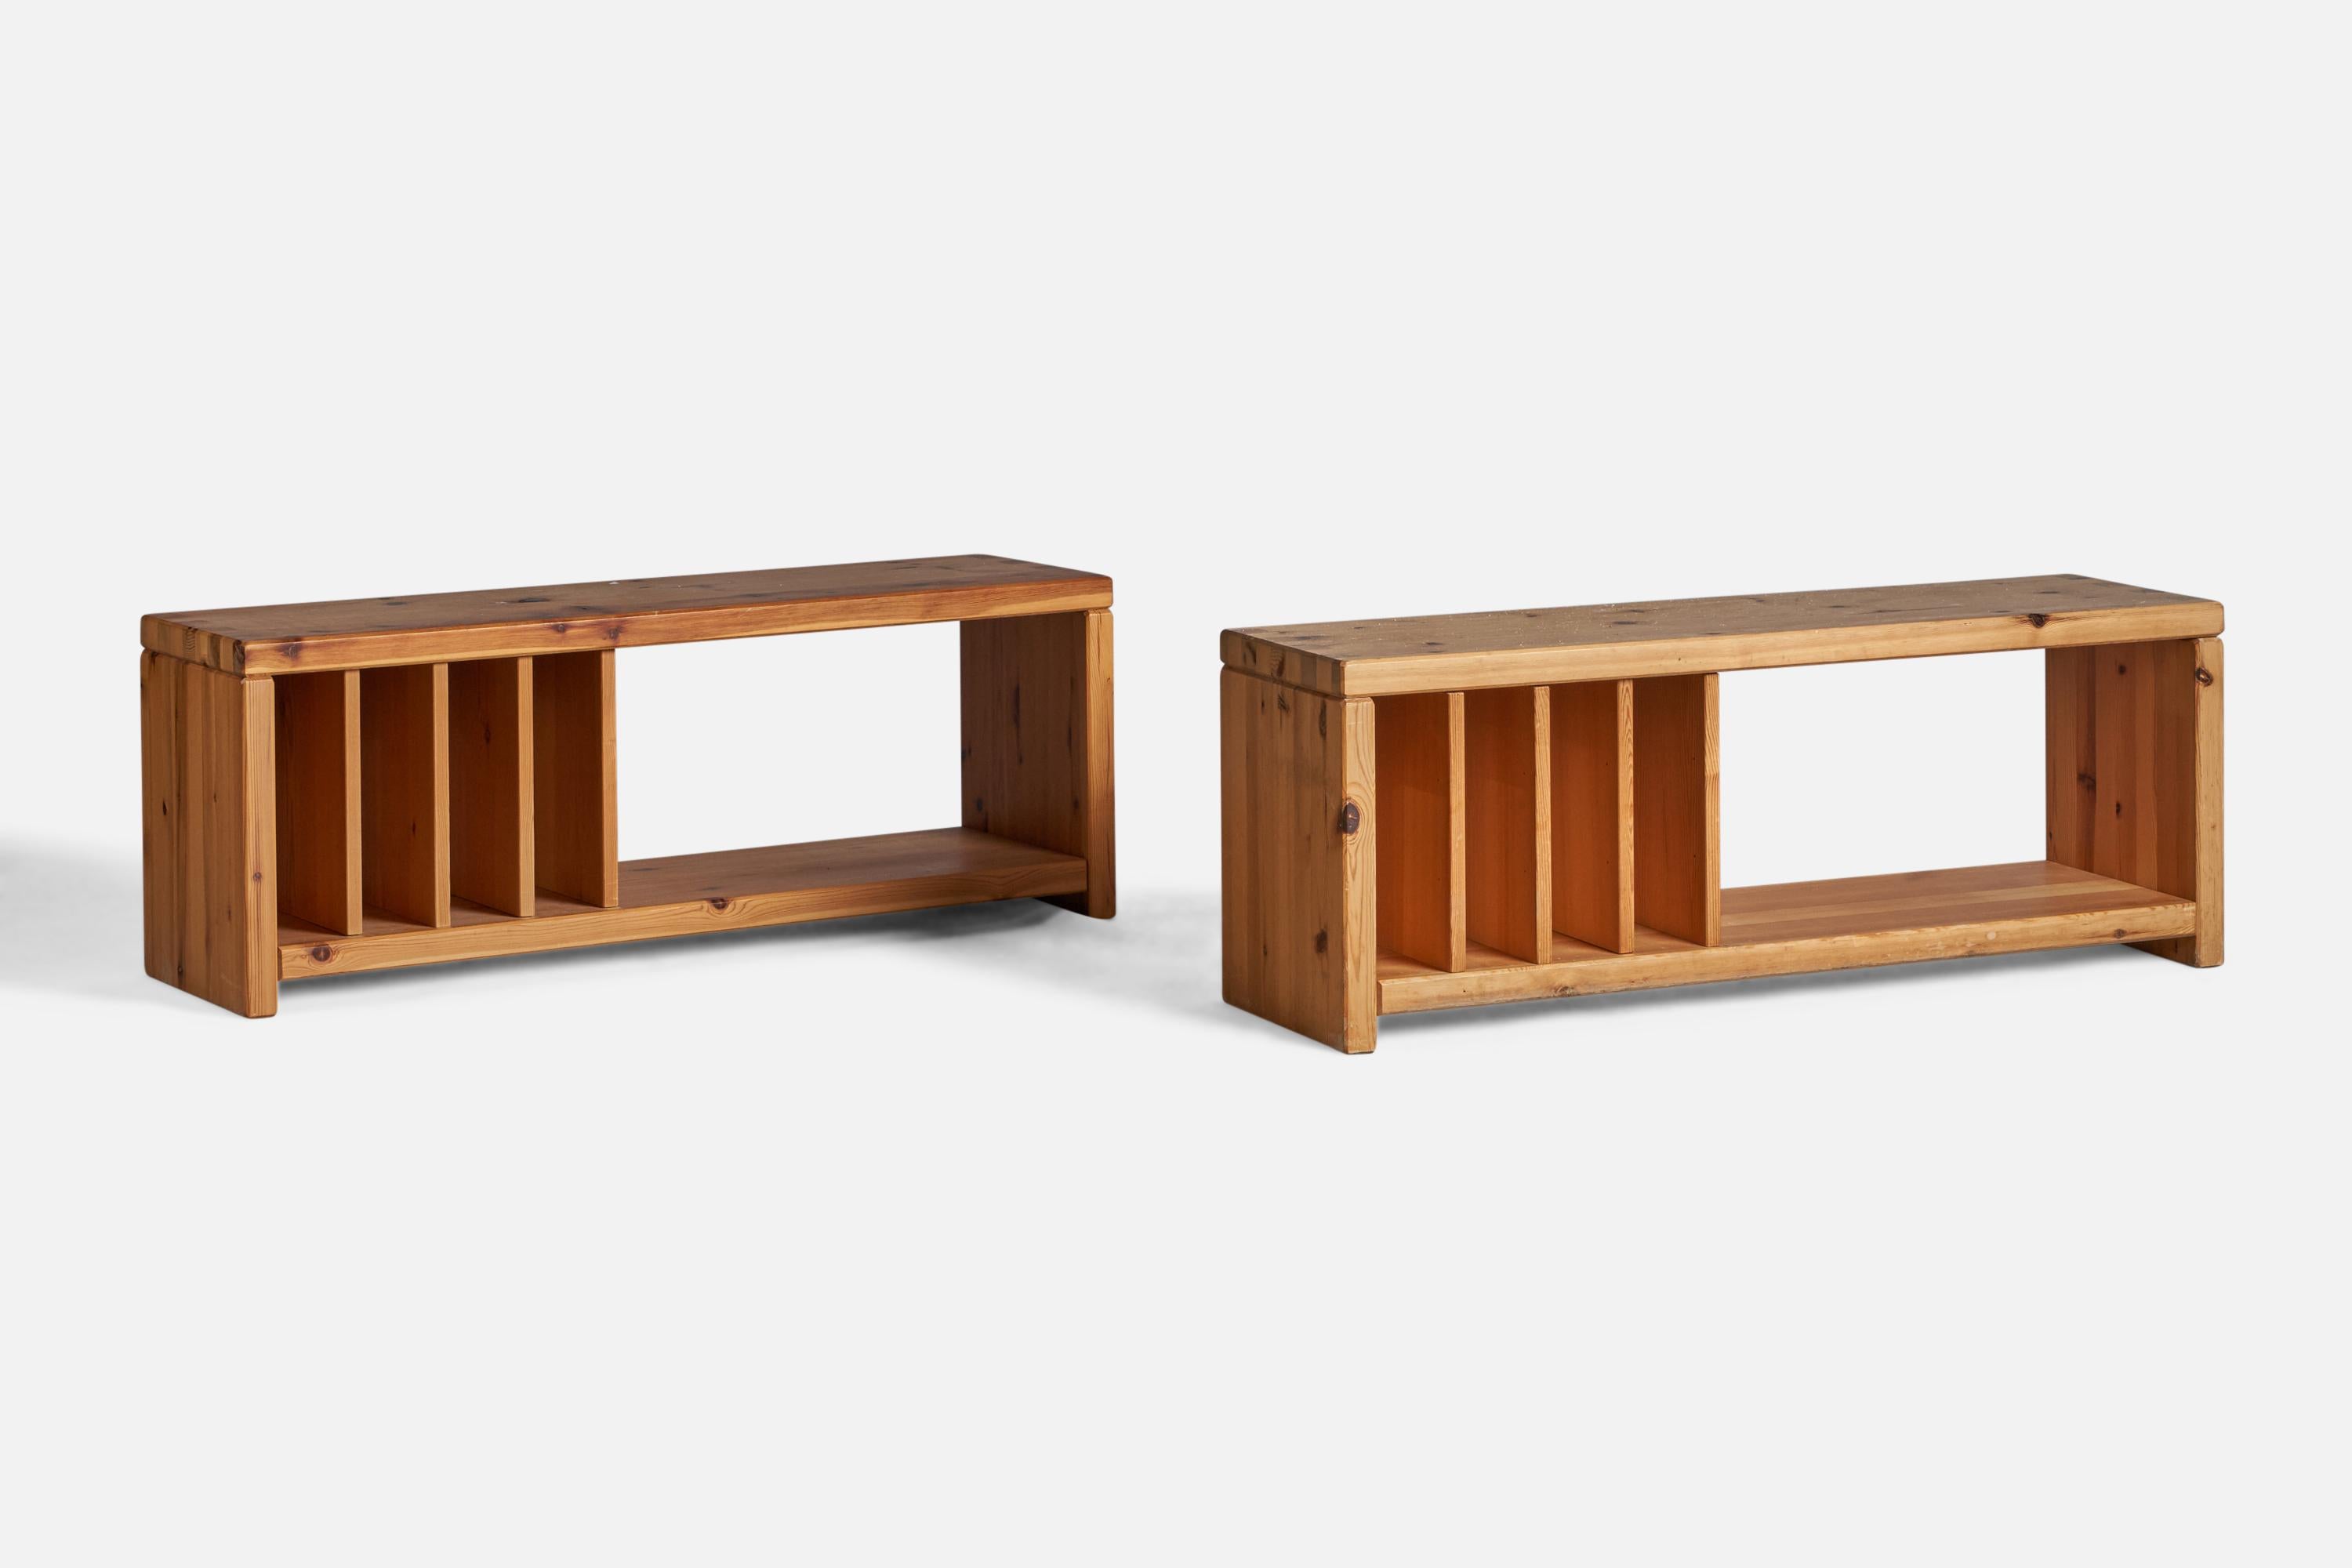 A pair of solid pine sideboards or benches, designed and produced in Denmark, c. 1970s.